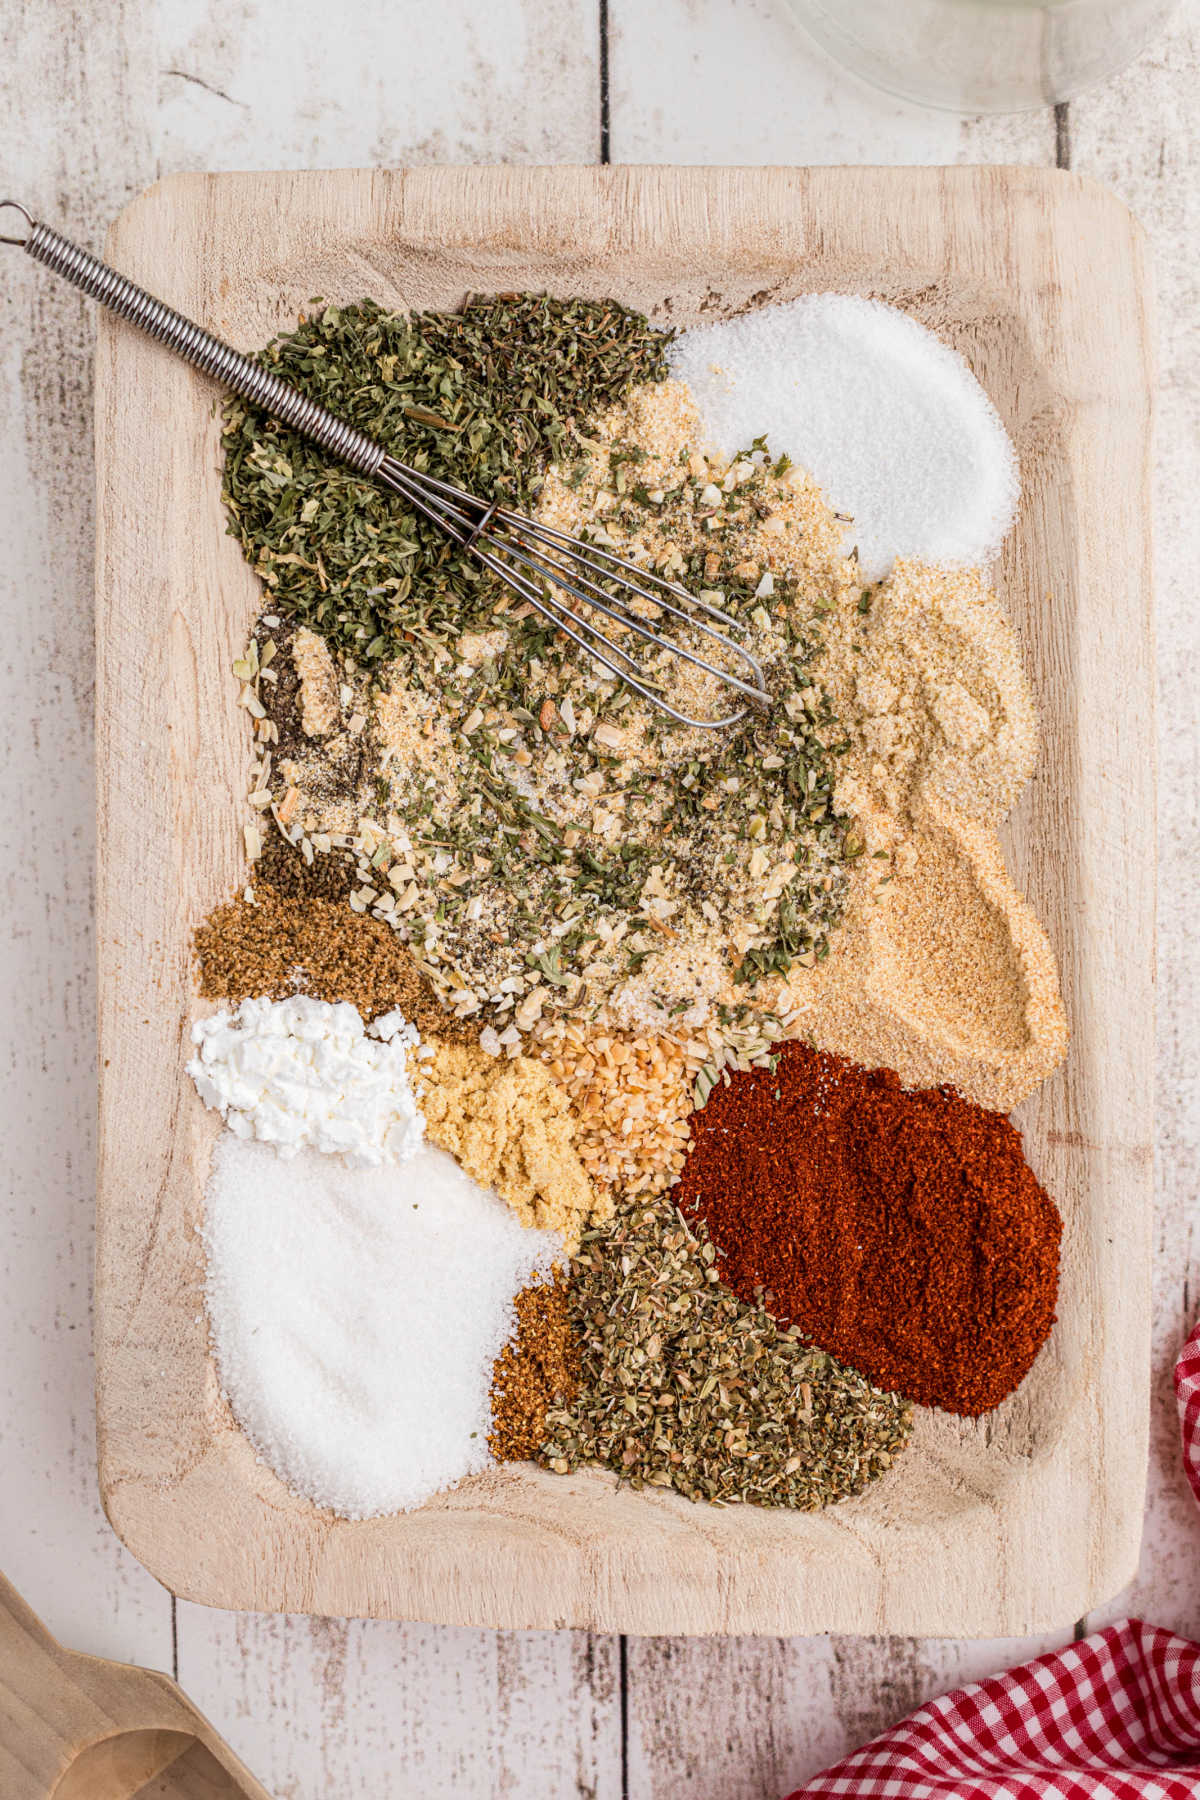 Overhead shot of a wooden container with seasoning about to be mixed up.